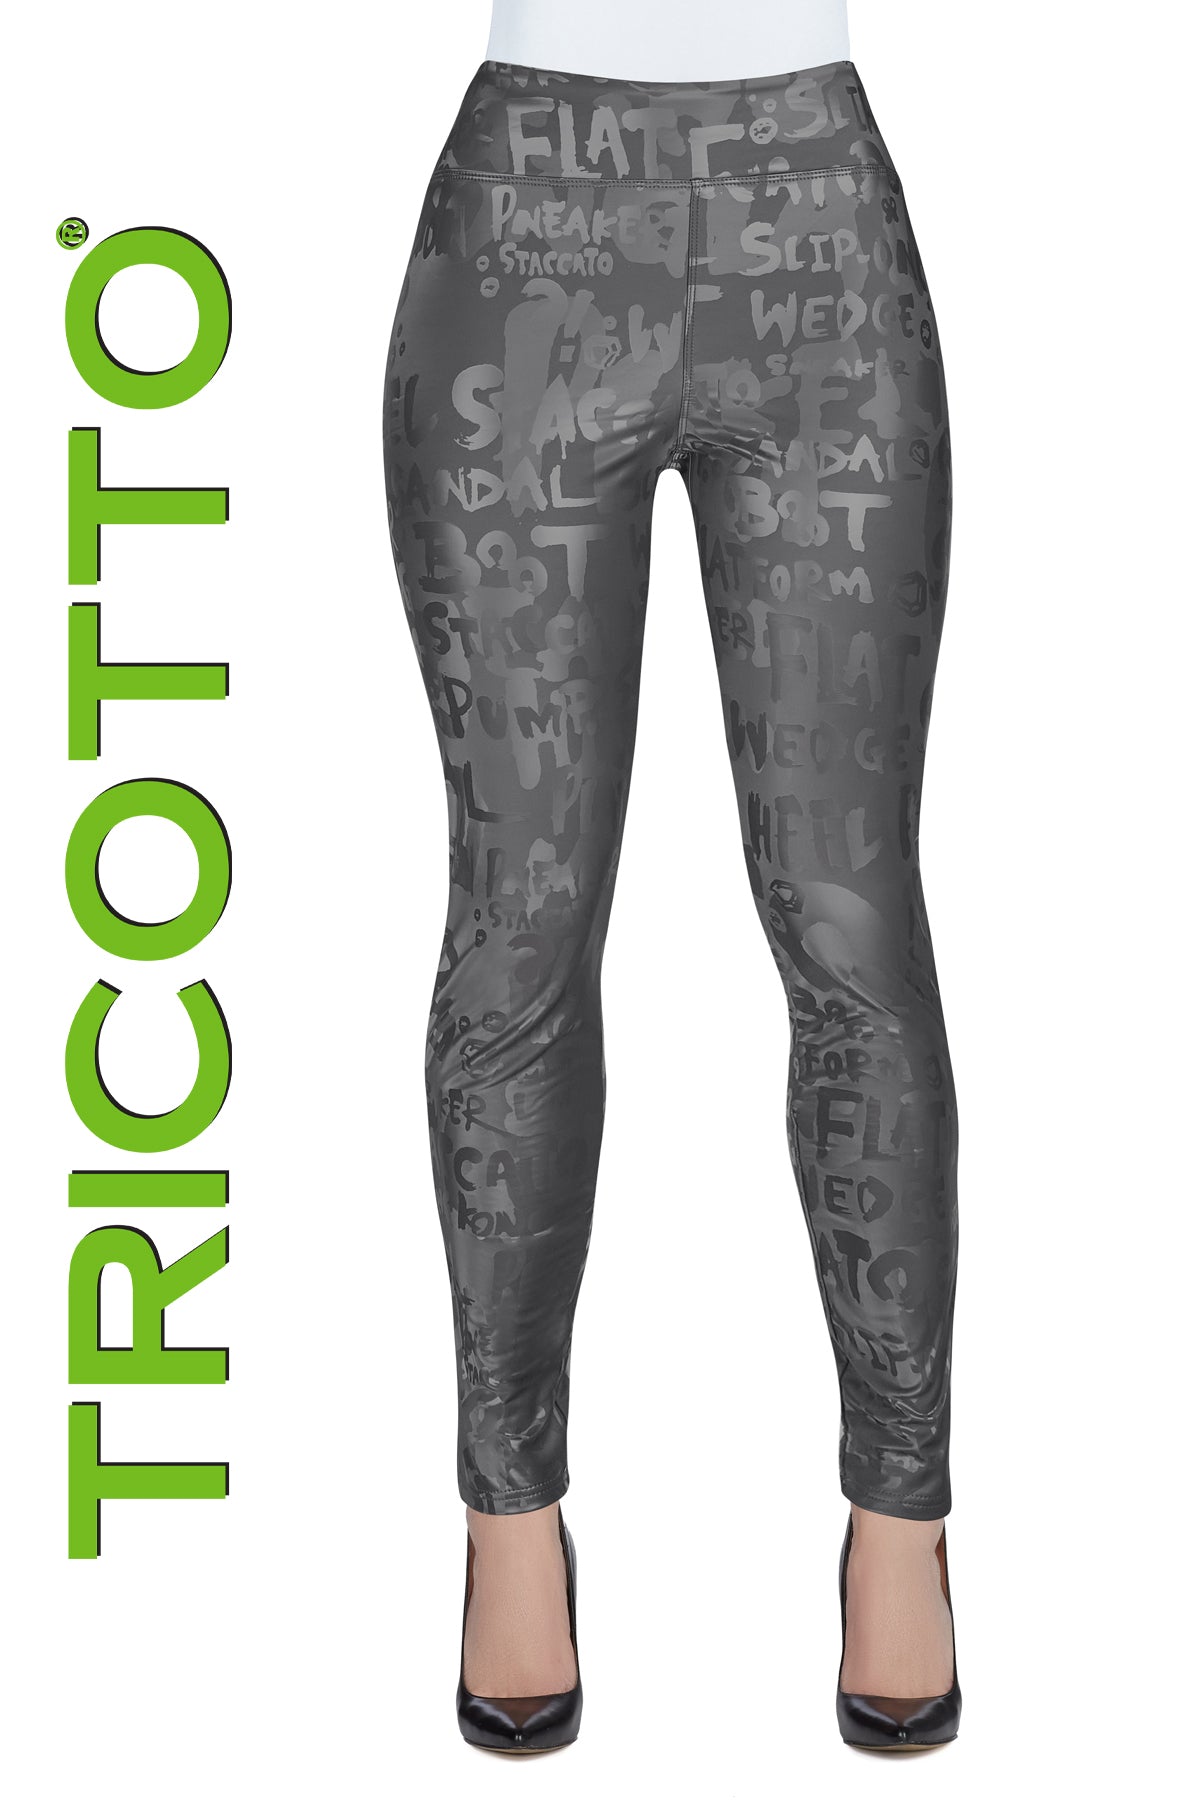 Tricotto Grey Leggings-Tricotto Printed Leggings-Buy Tricotto Leggings Online-Tricotto Clothing Montreal